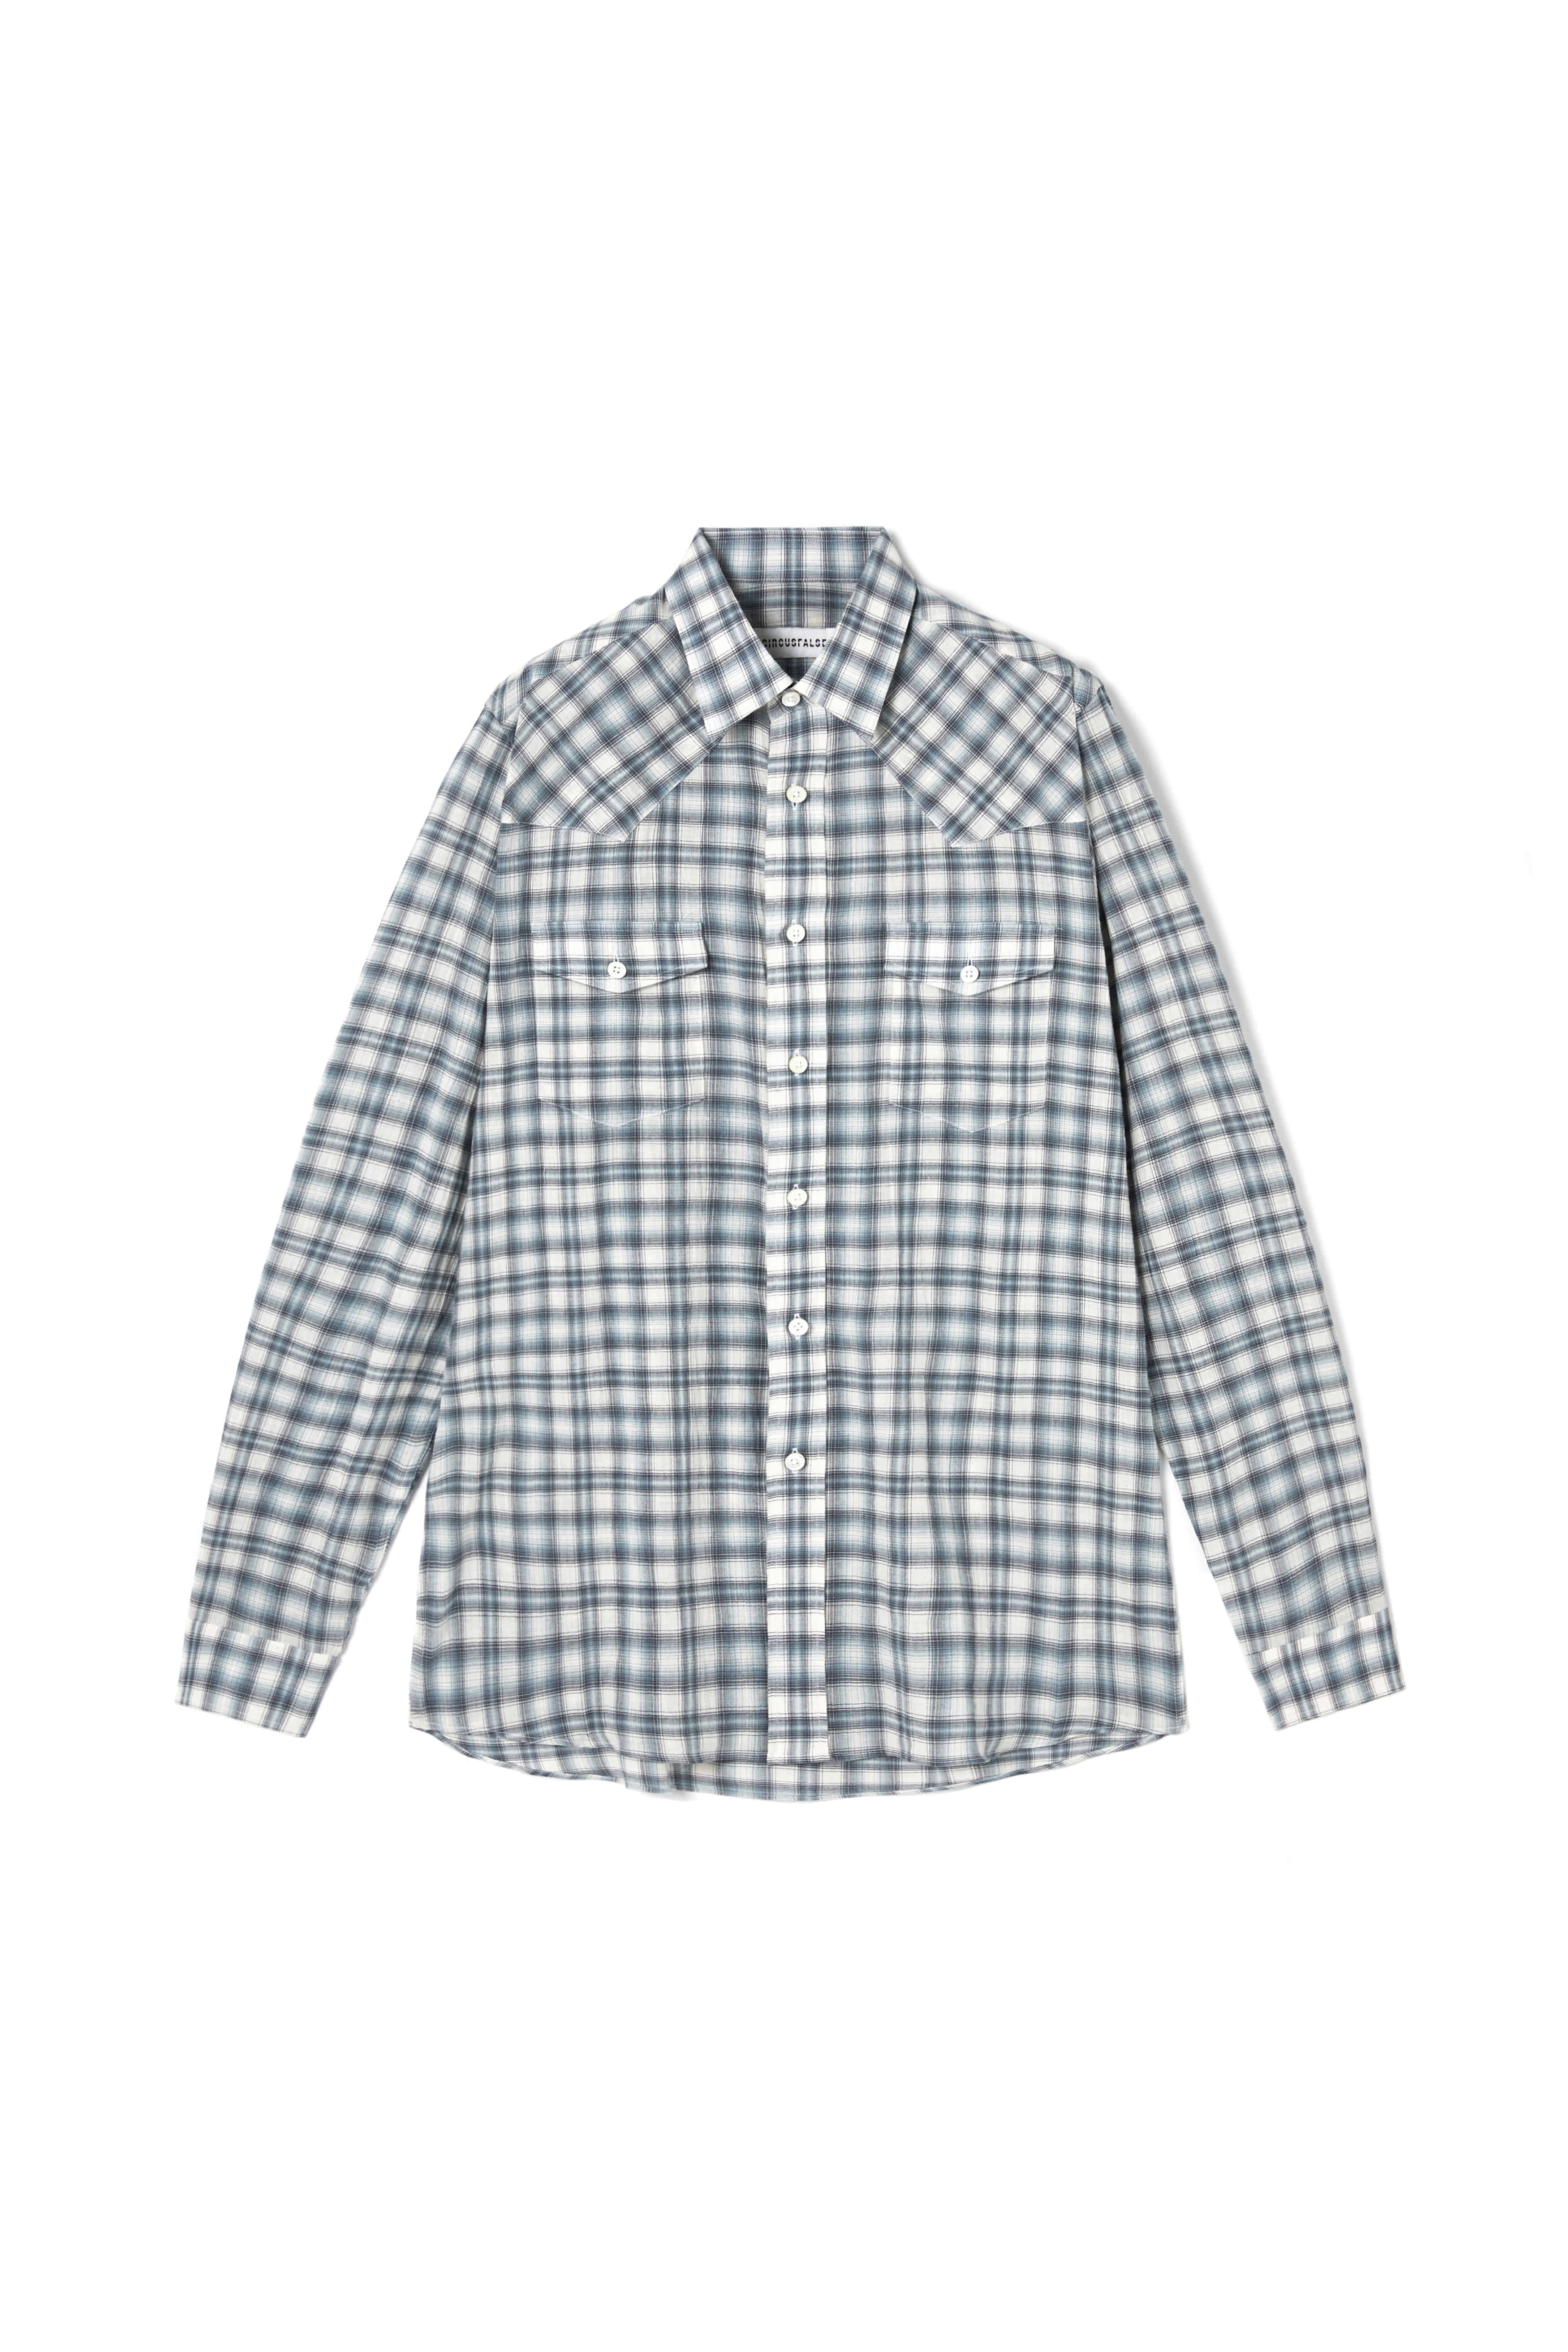 CIRCUSFALSE: WESTERN SHIRTS IN BLUE MULTI CECKED